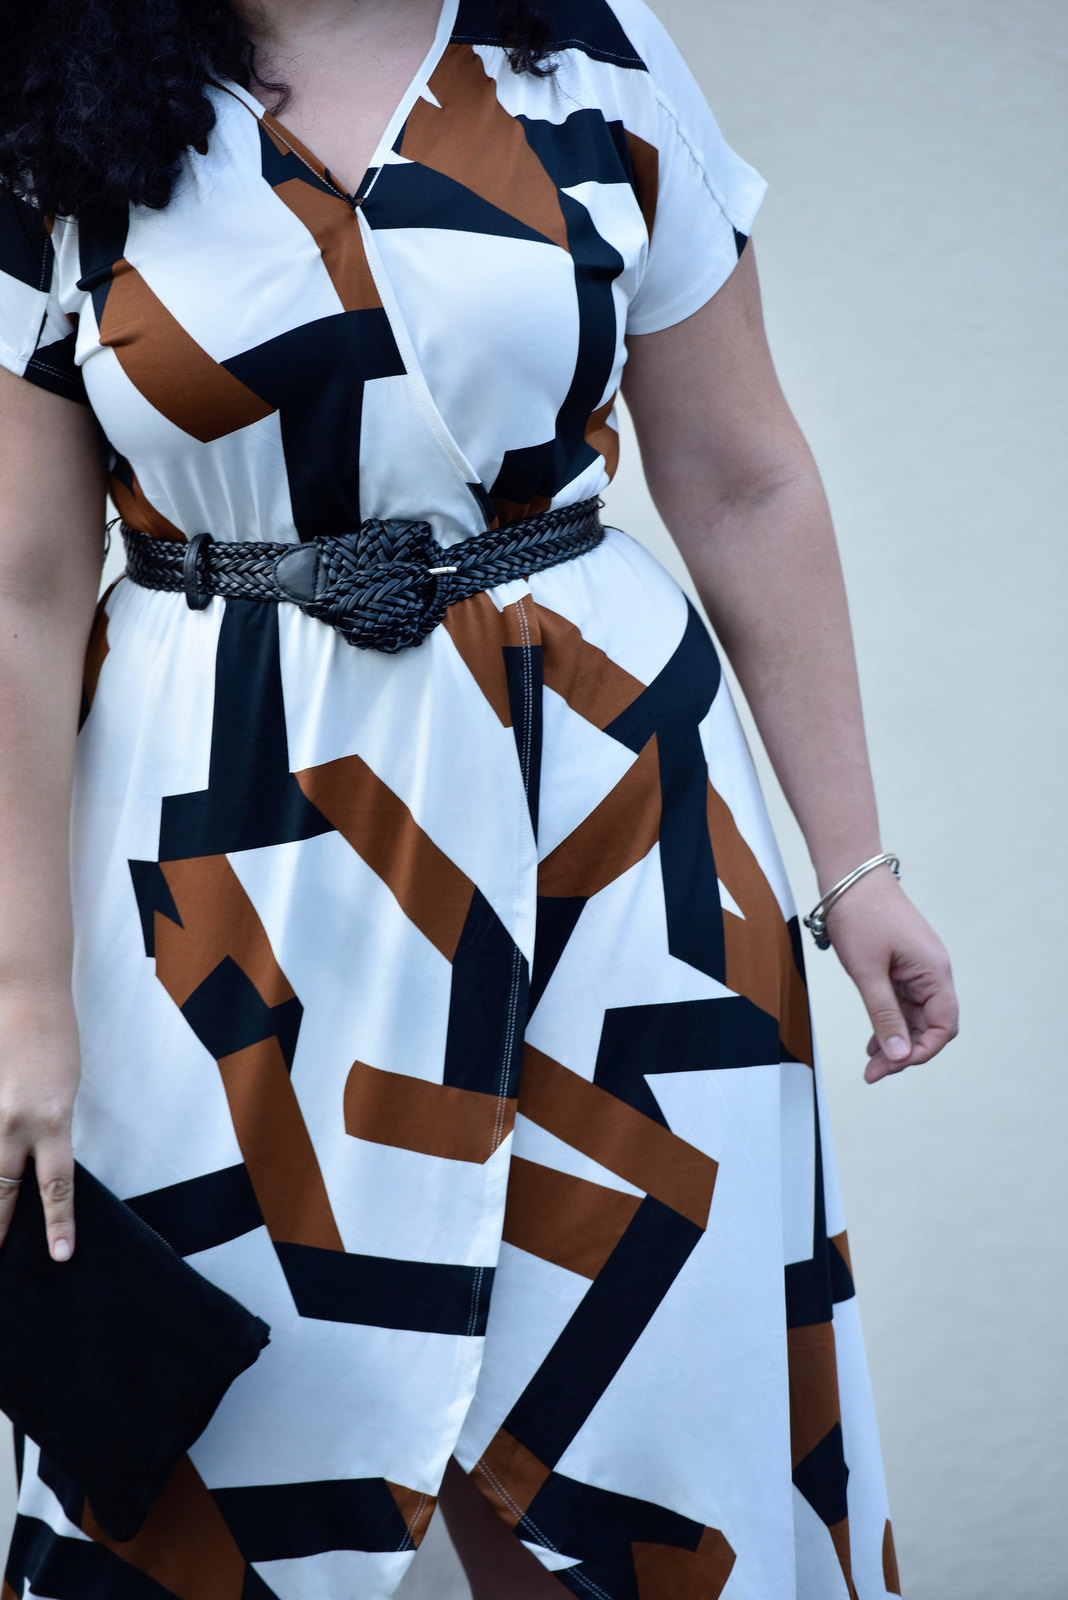 The High-Low Dress You Need Now via @GirlwithCurves